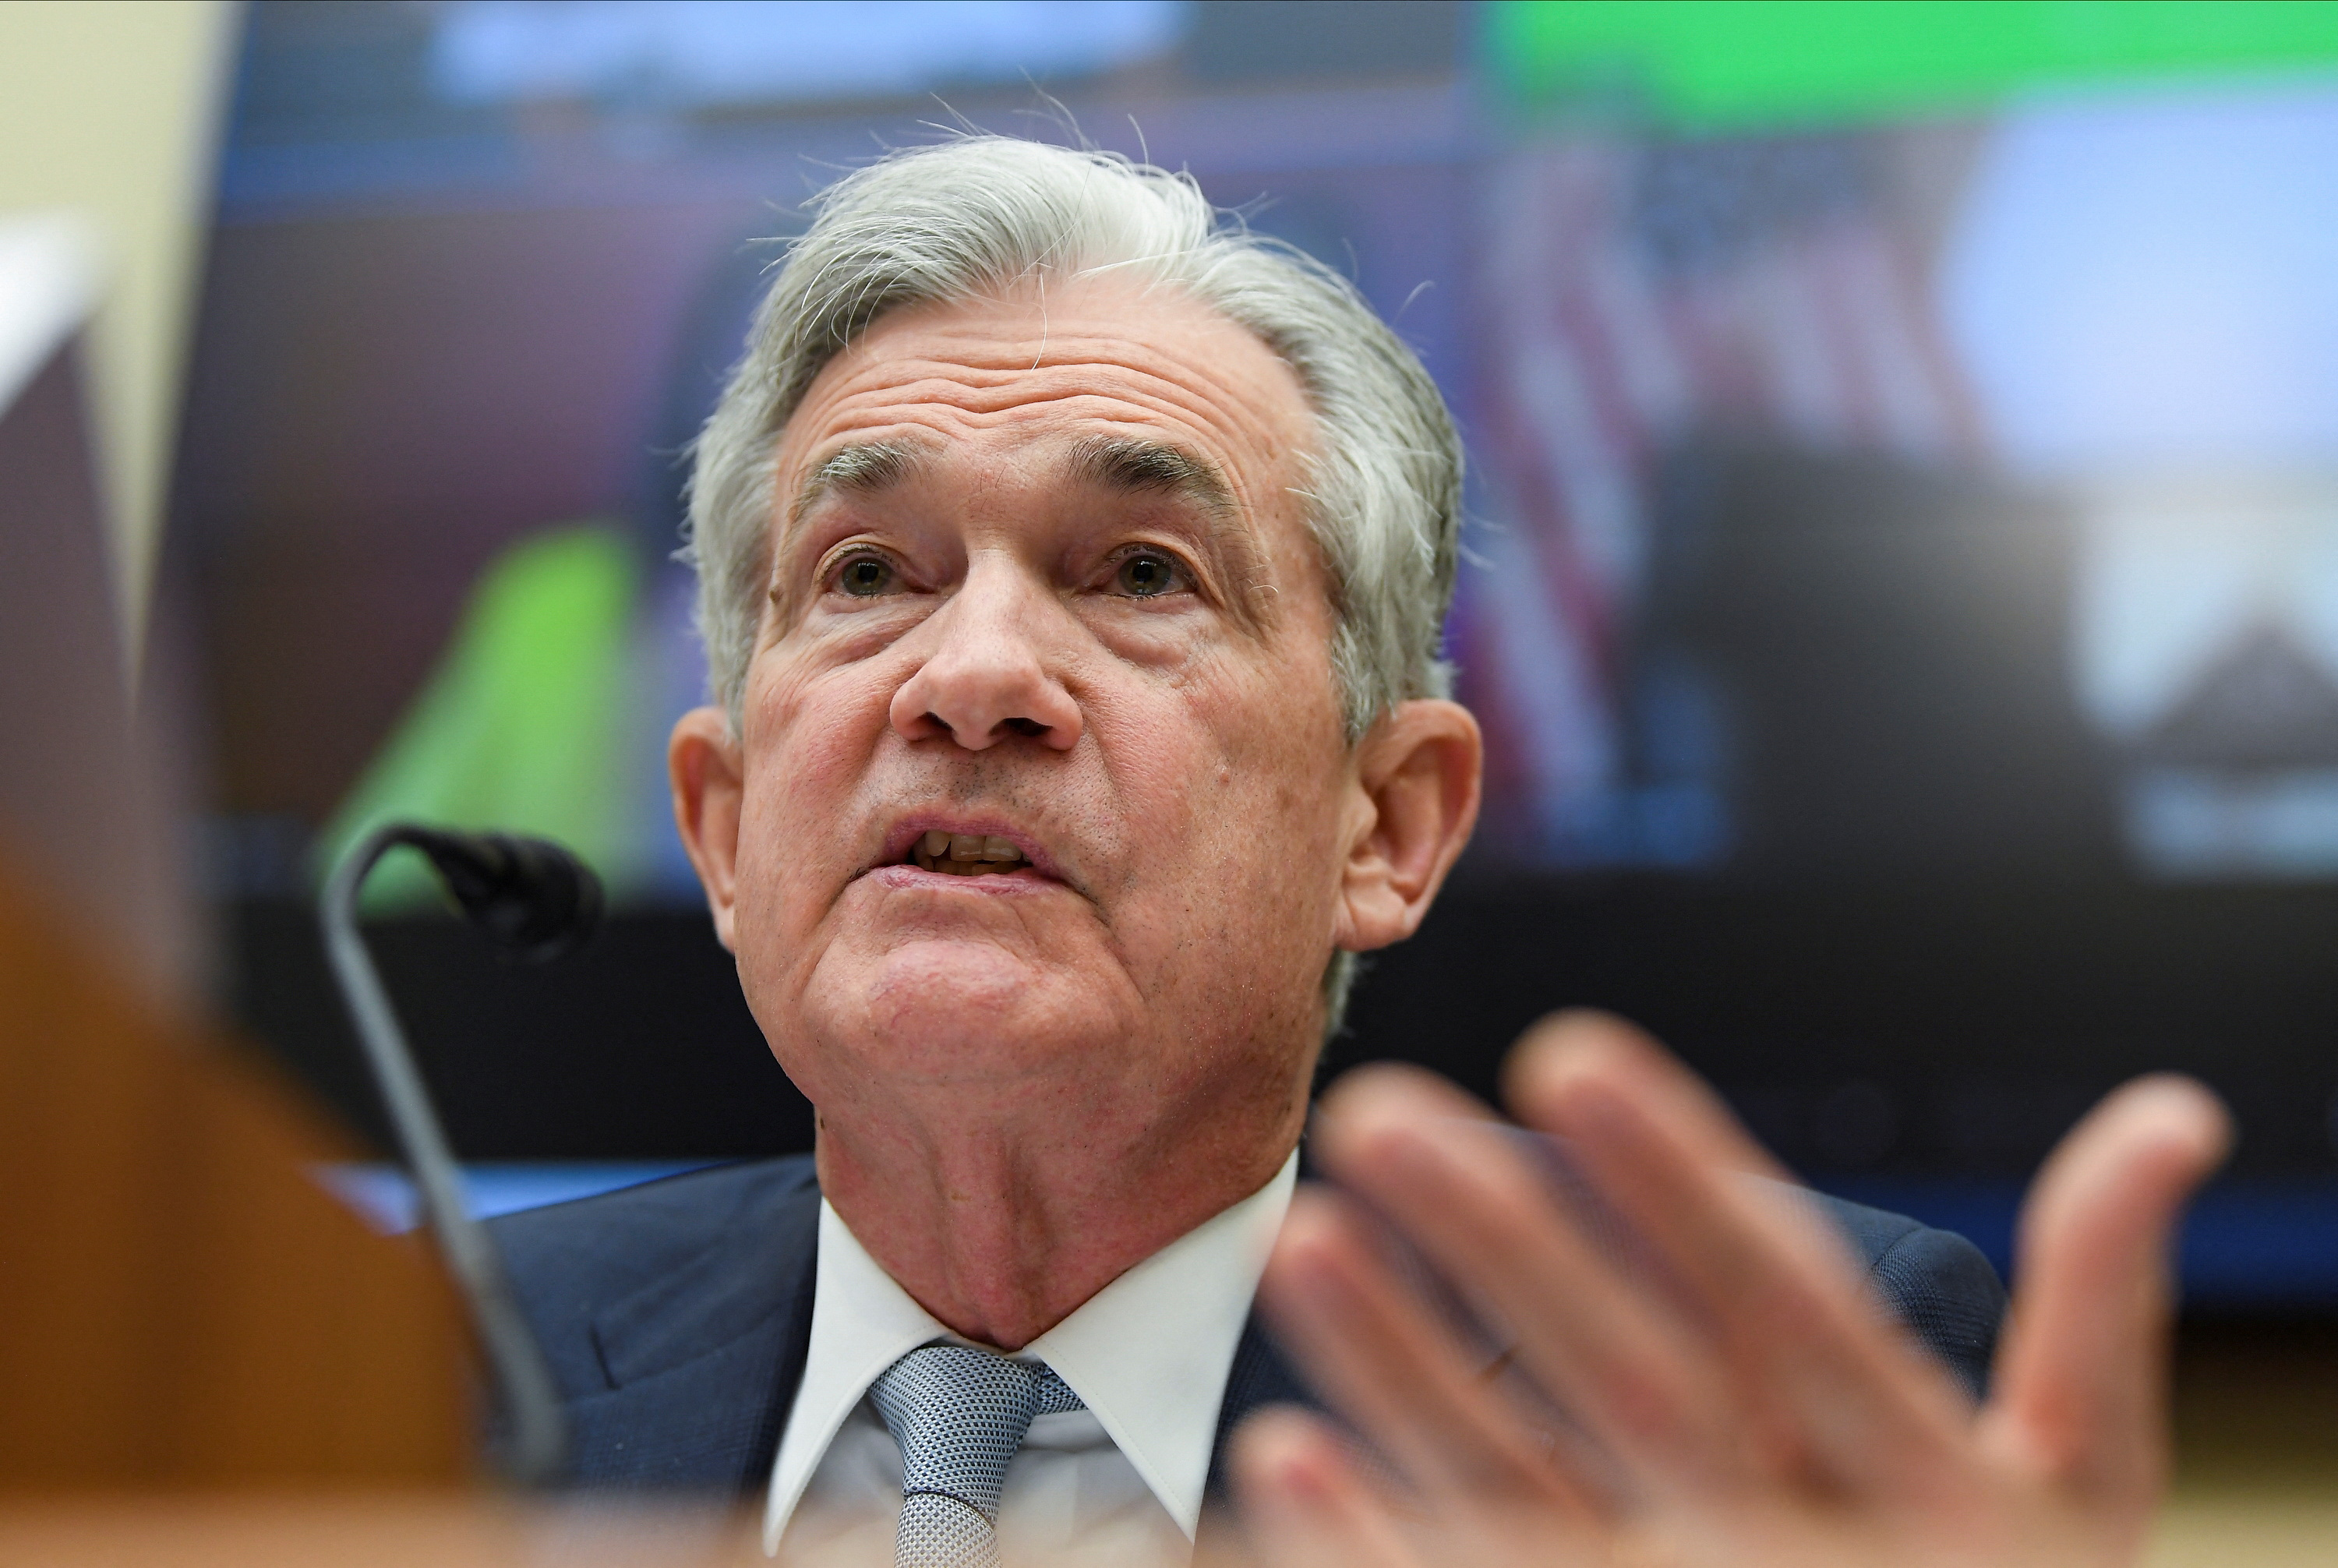 U.S. Federal Reserve Board Chair Jerome Powell testifies before a House Financial Services Committee hearing, in Washington